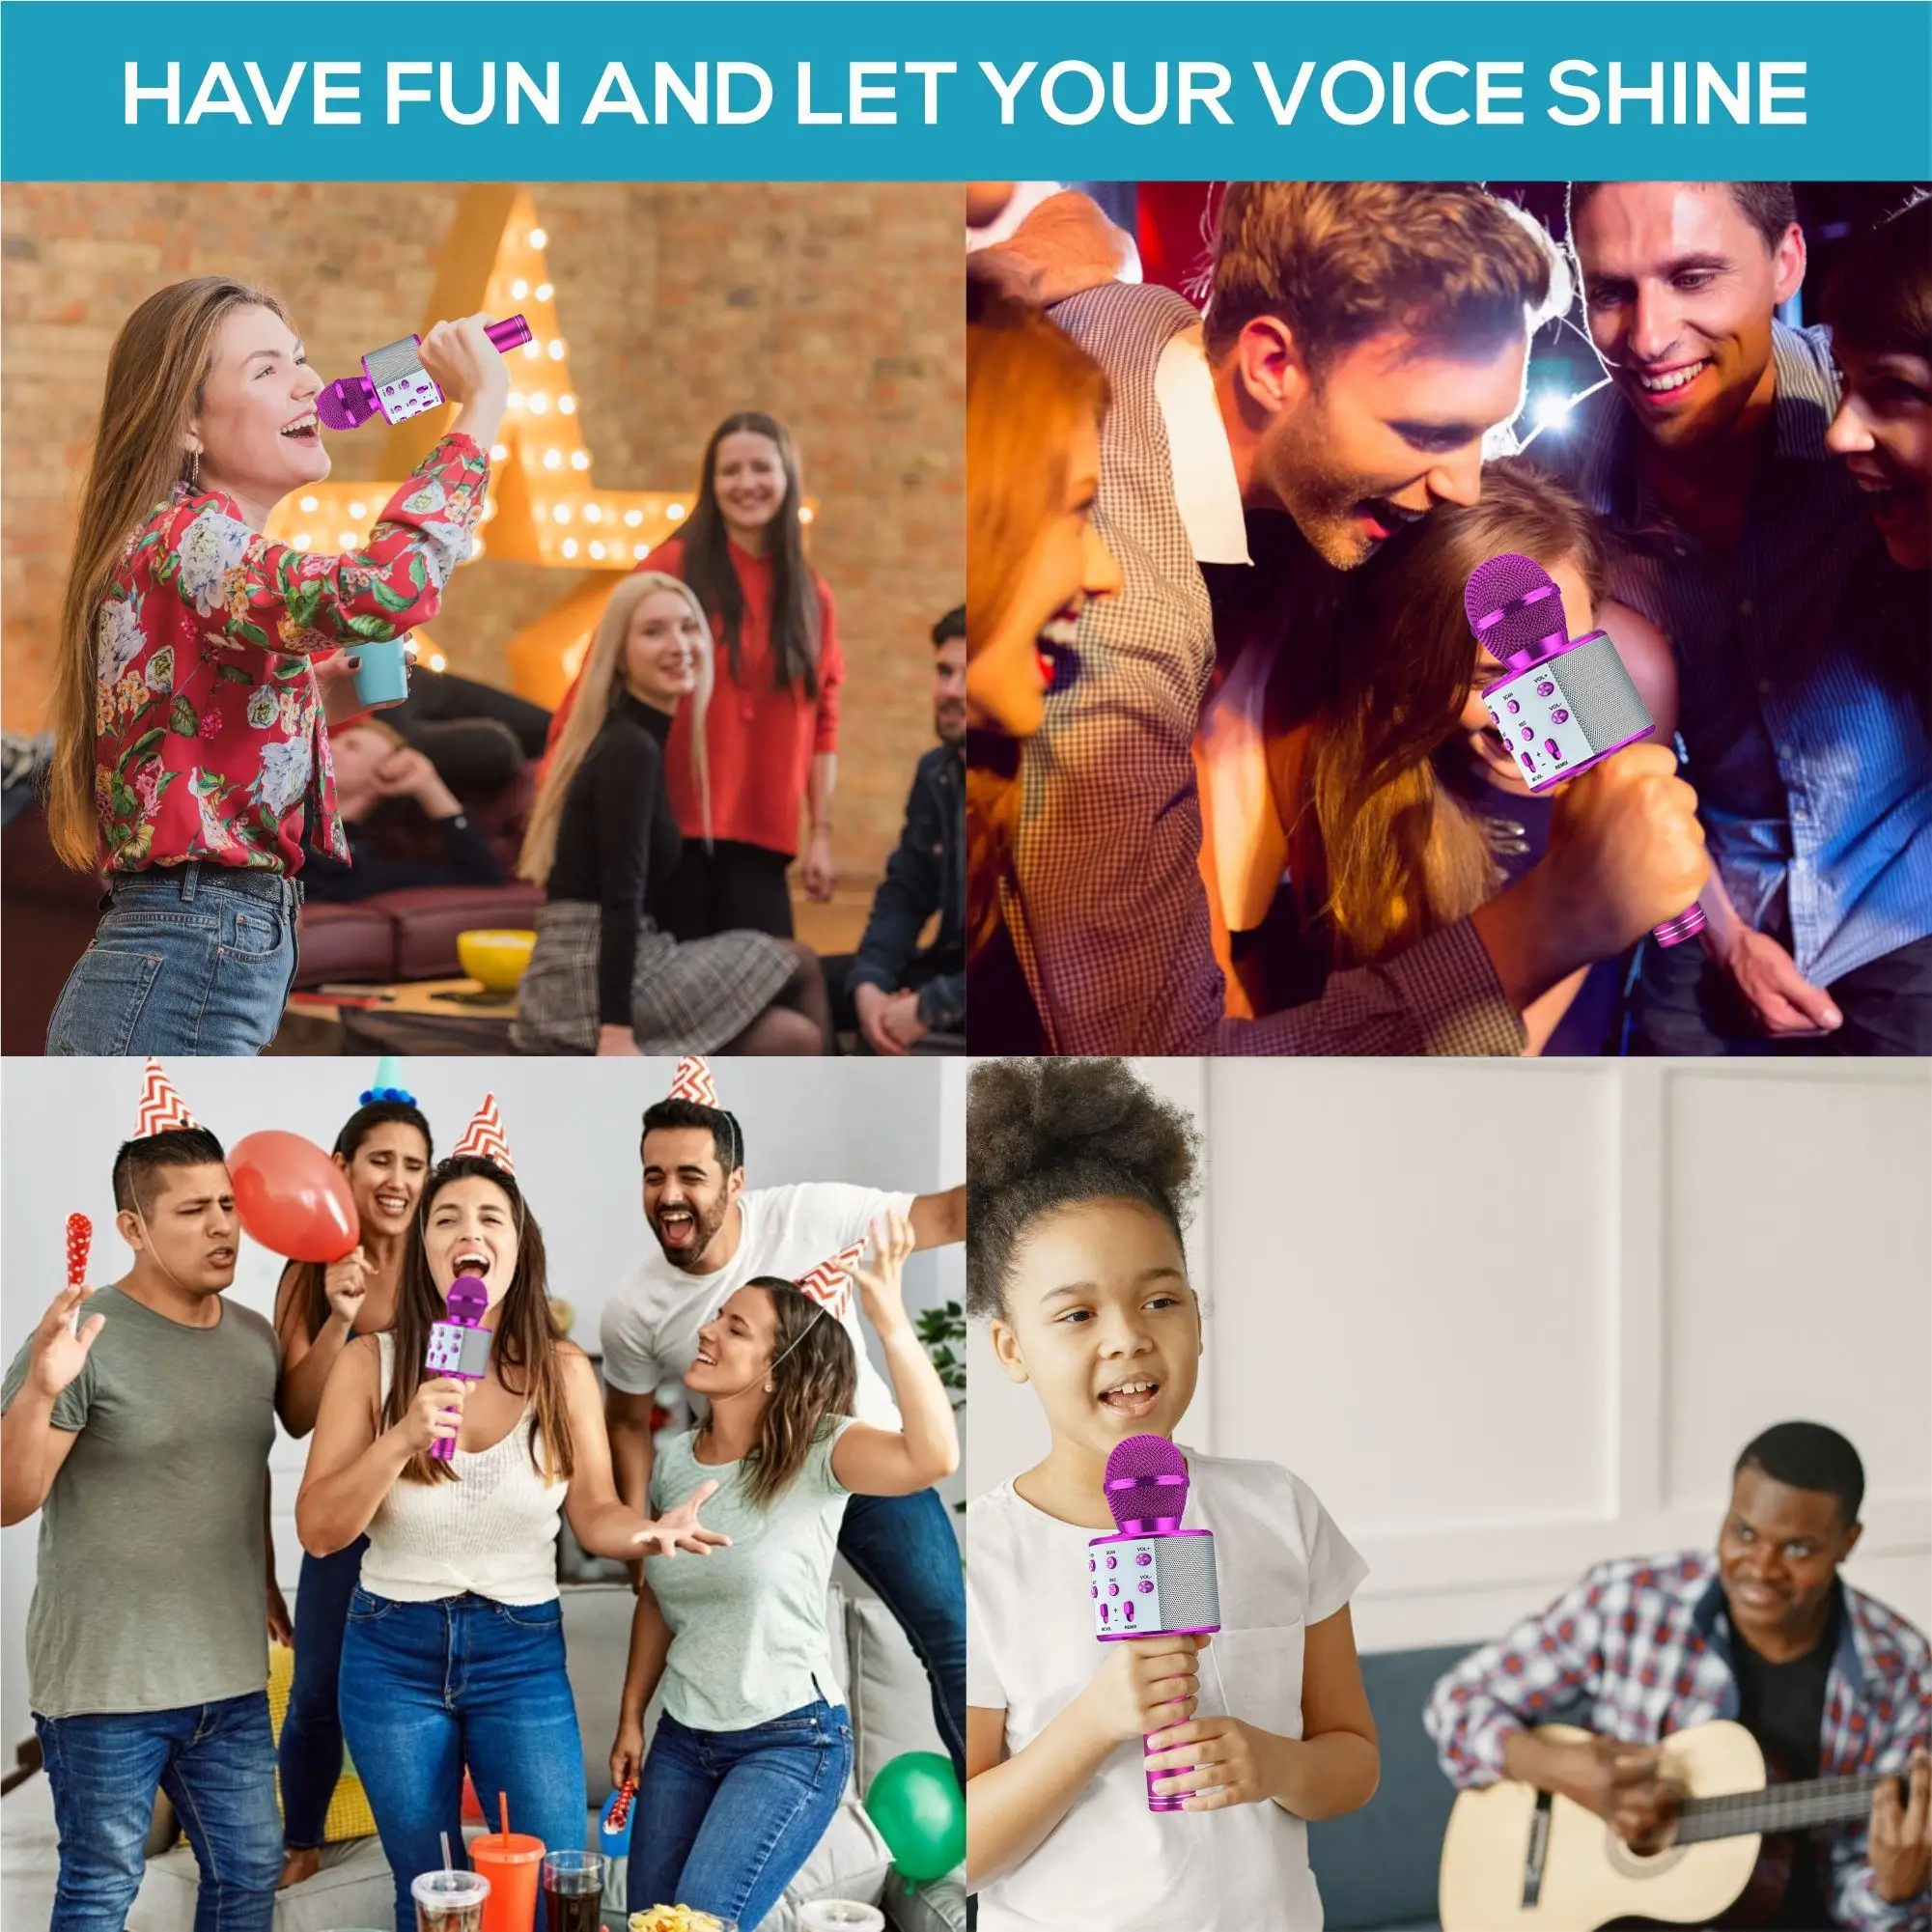 Wireless Bluetooth Karaoke Microphone, 5-in-1 Portable Handheld Mic Speaker for All Smartphones,Gifts for Girls Kids All Age